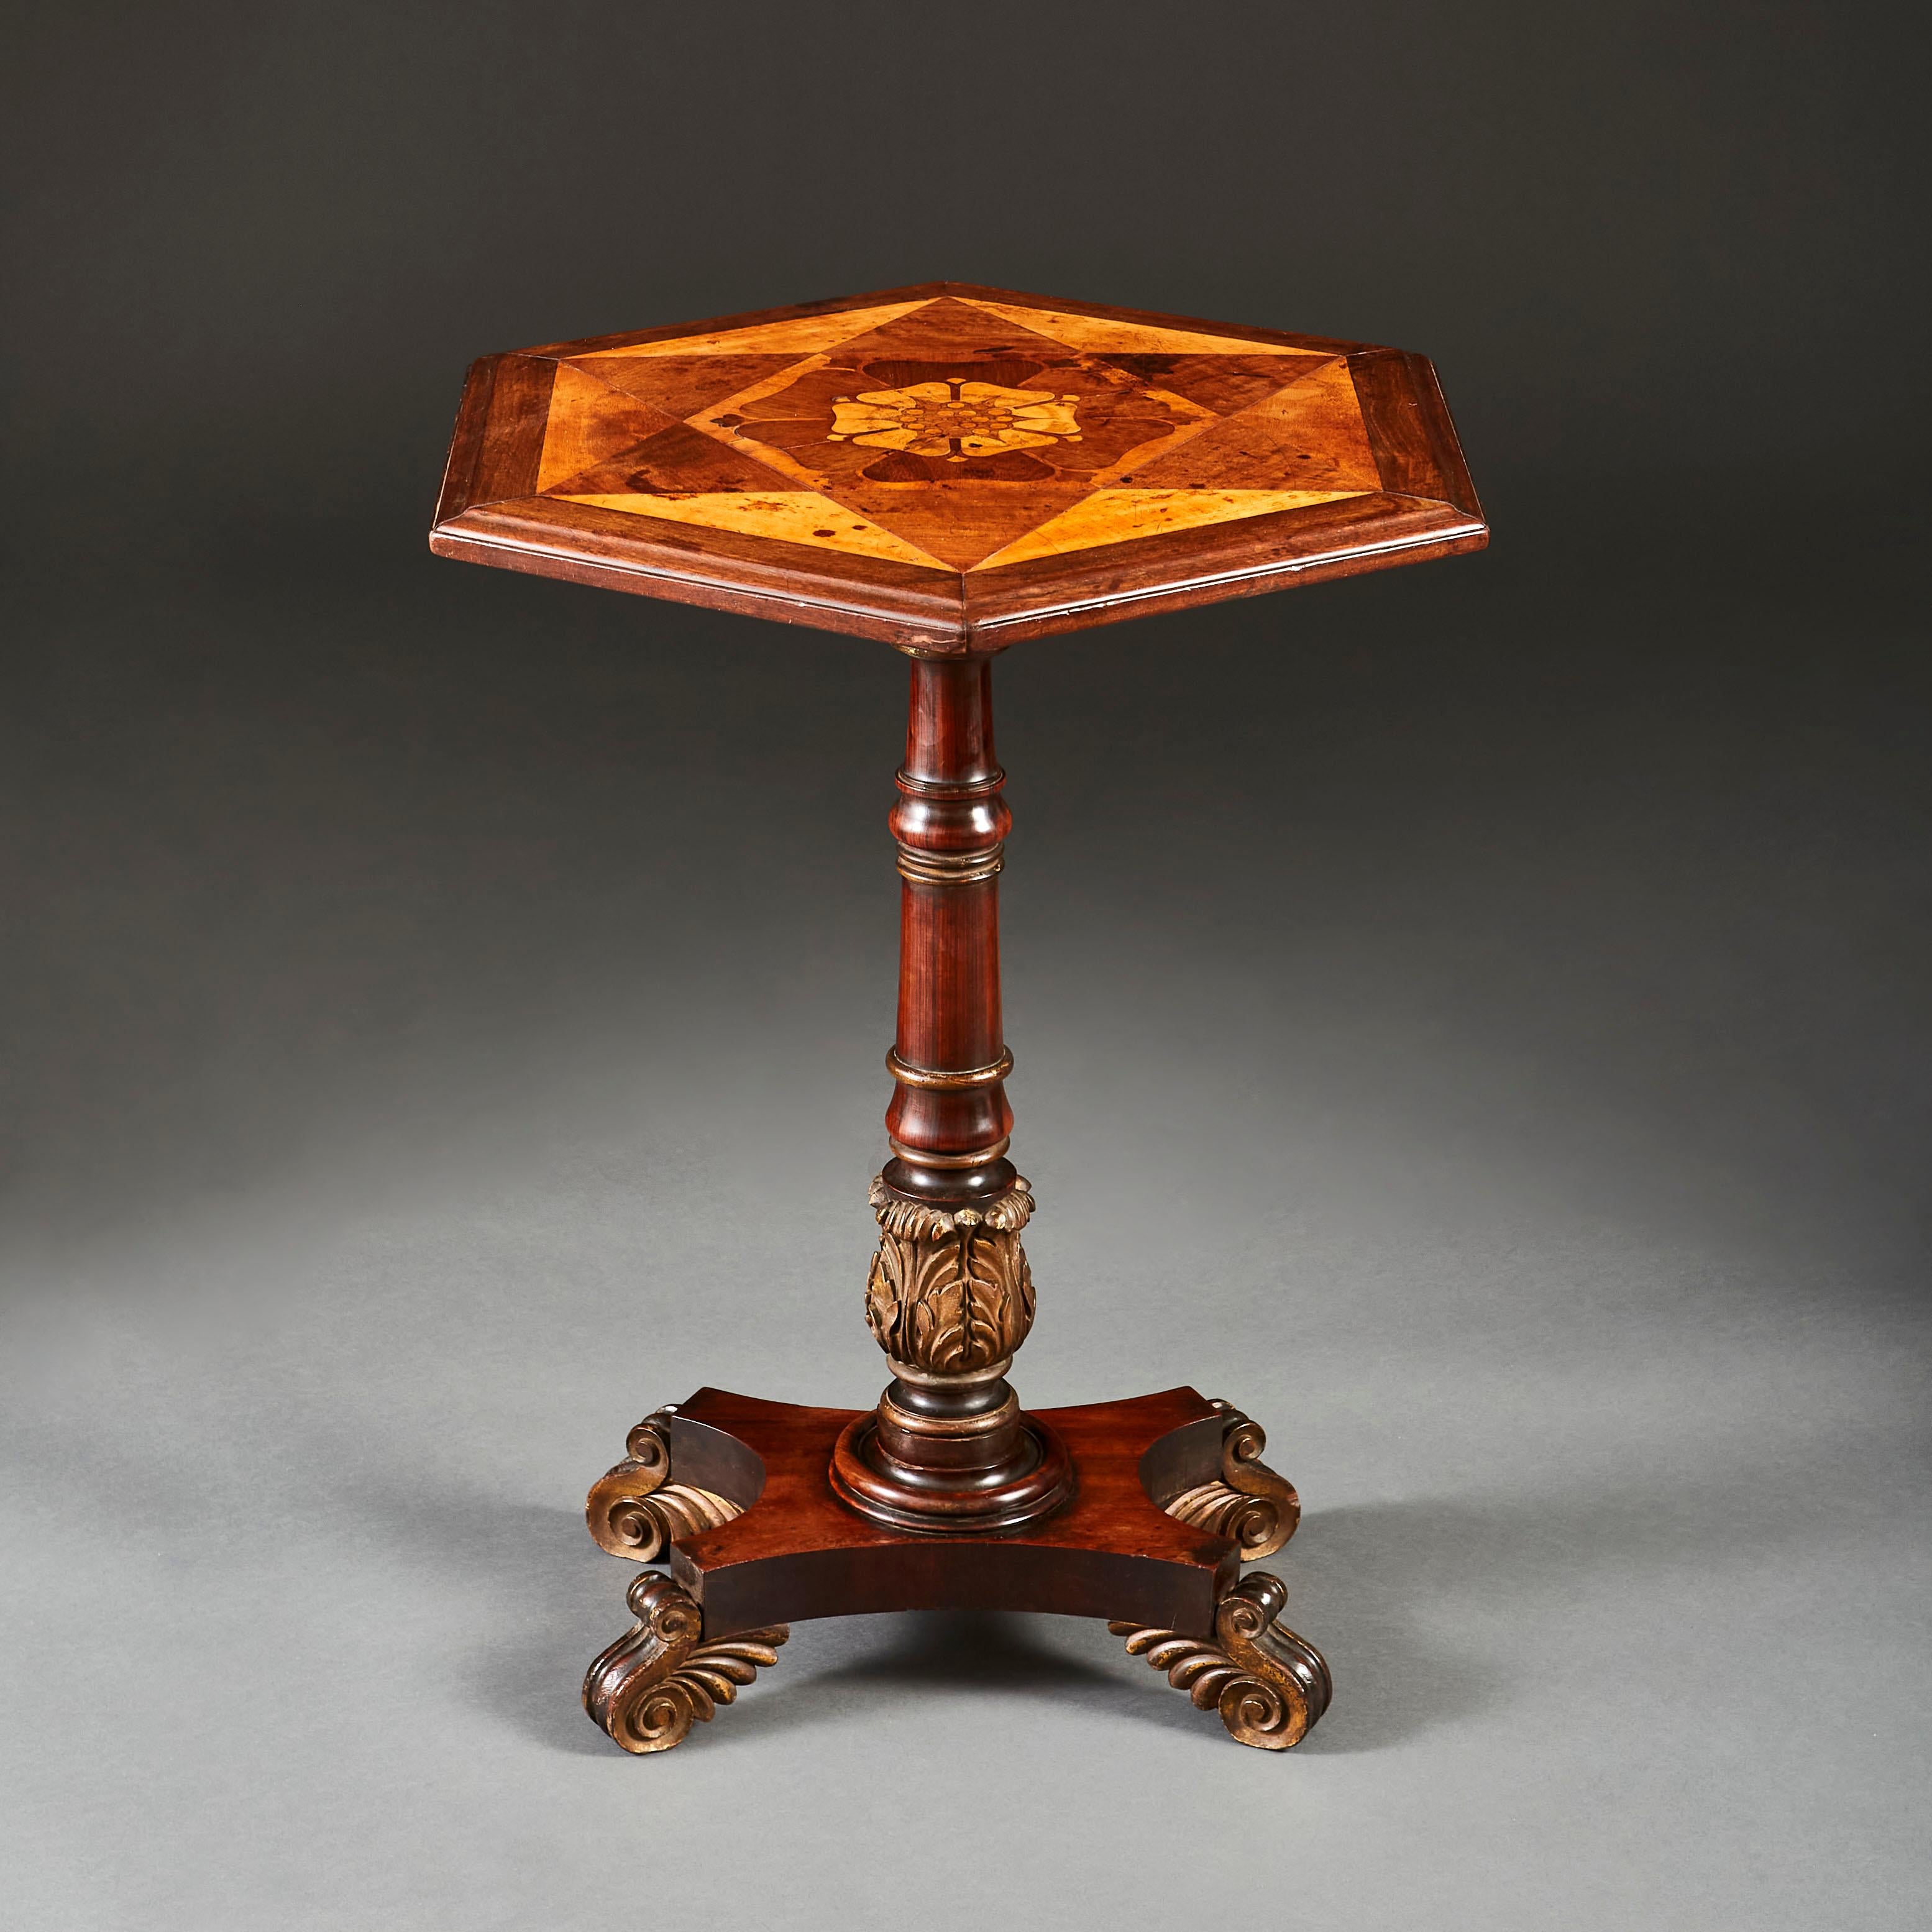 A William IV an early 19th century occasional table with hexagonal parquetry top, inlaid with an English Tudor rose central to the top.

  